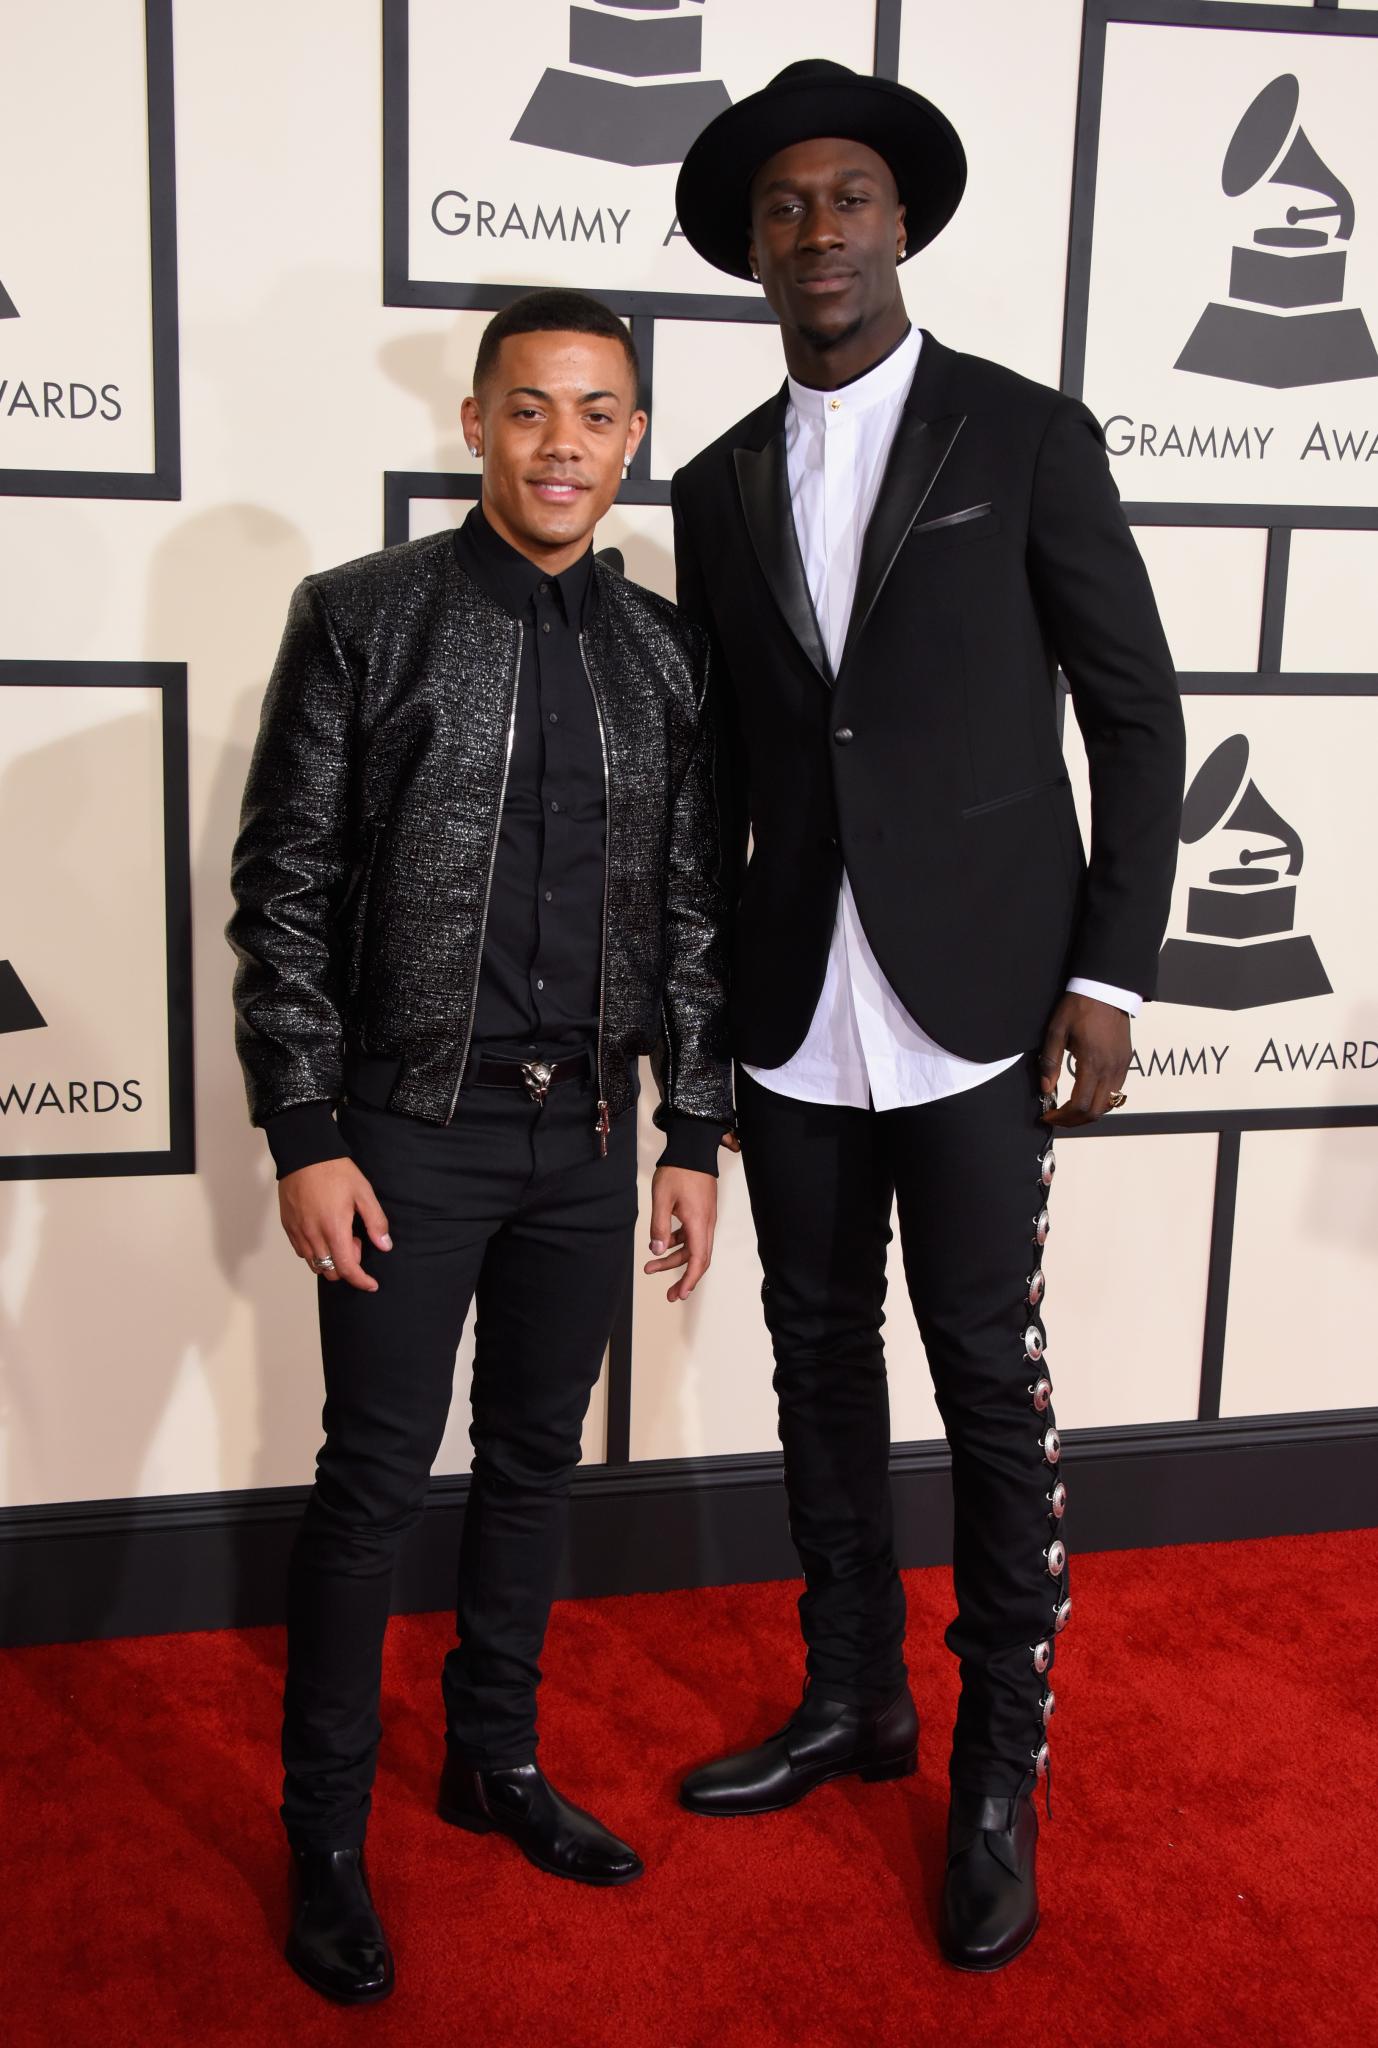 5 Things You Need to Know About Nico & Vinz Before ESSENCE Fest